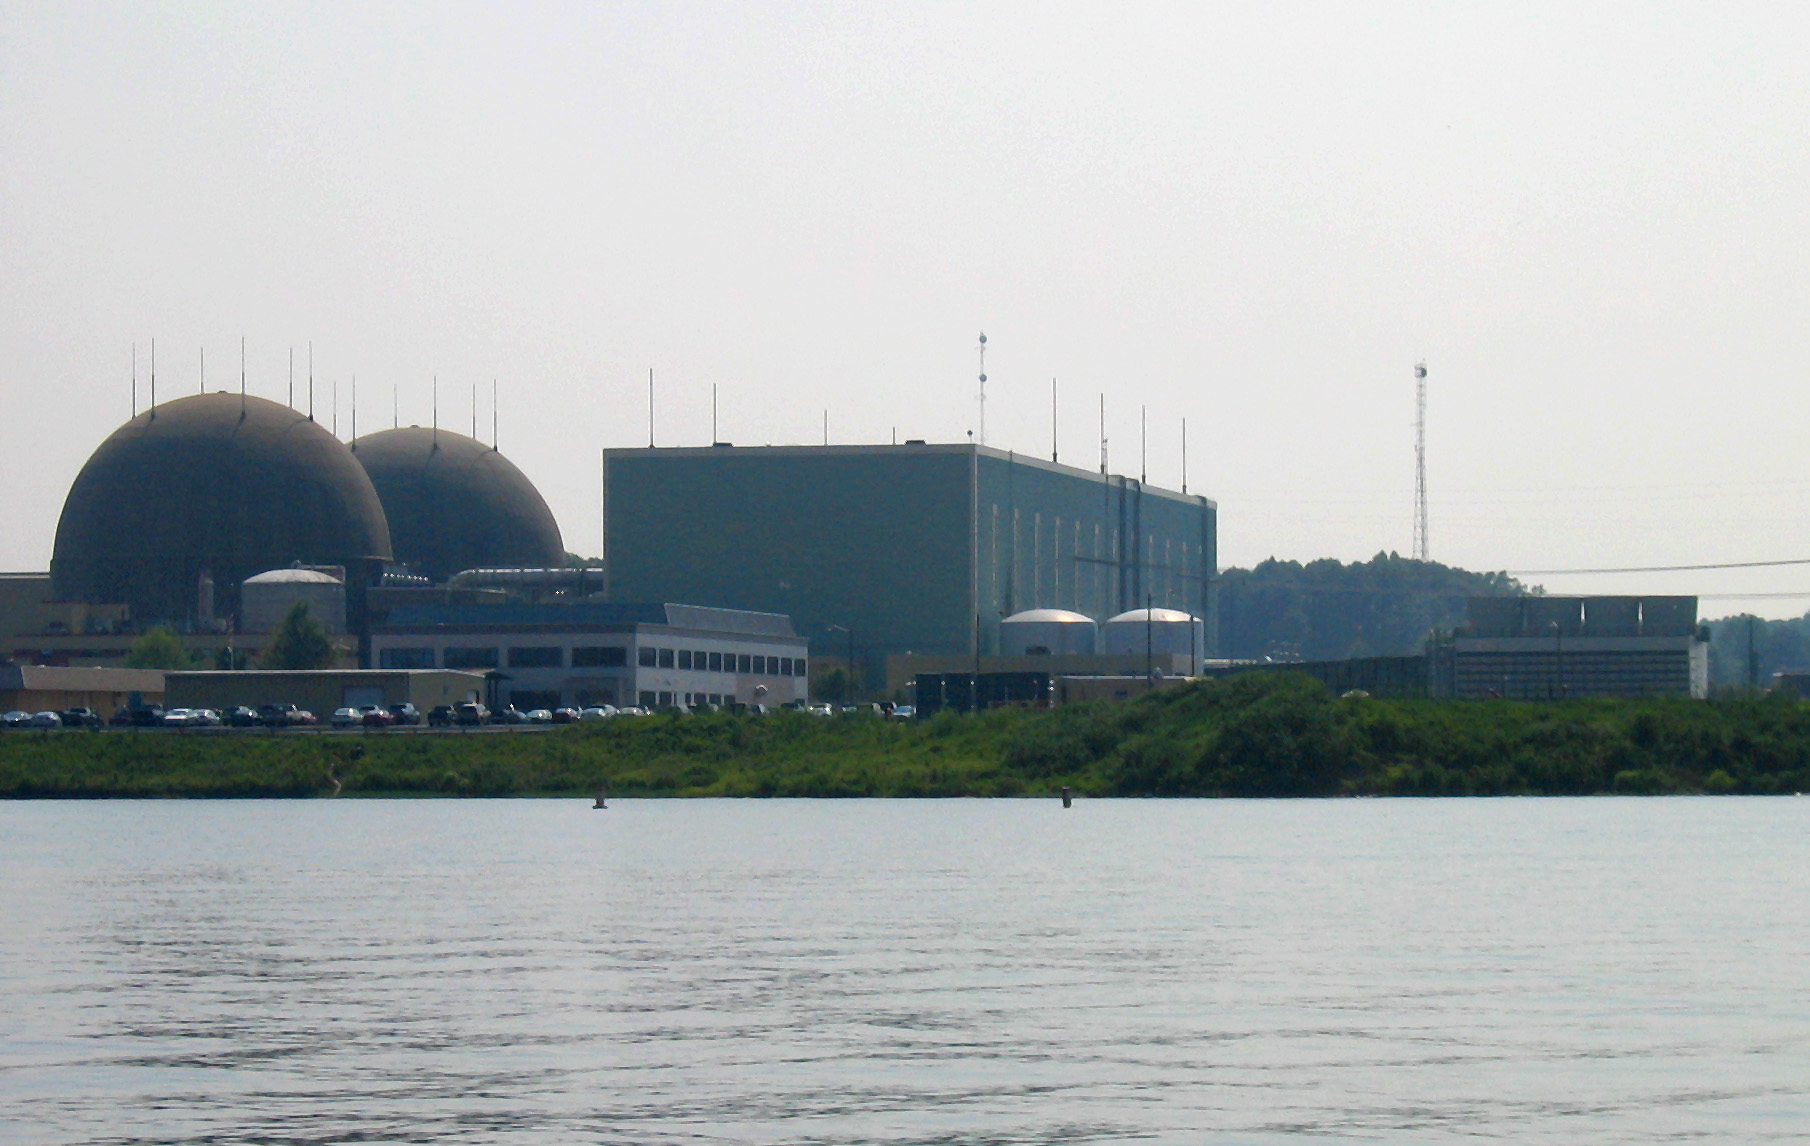 February 19, 1971 – Construction Begins on the North Anna Nuclear Generating Station in Louisa County, Virginia